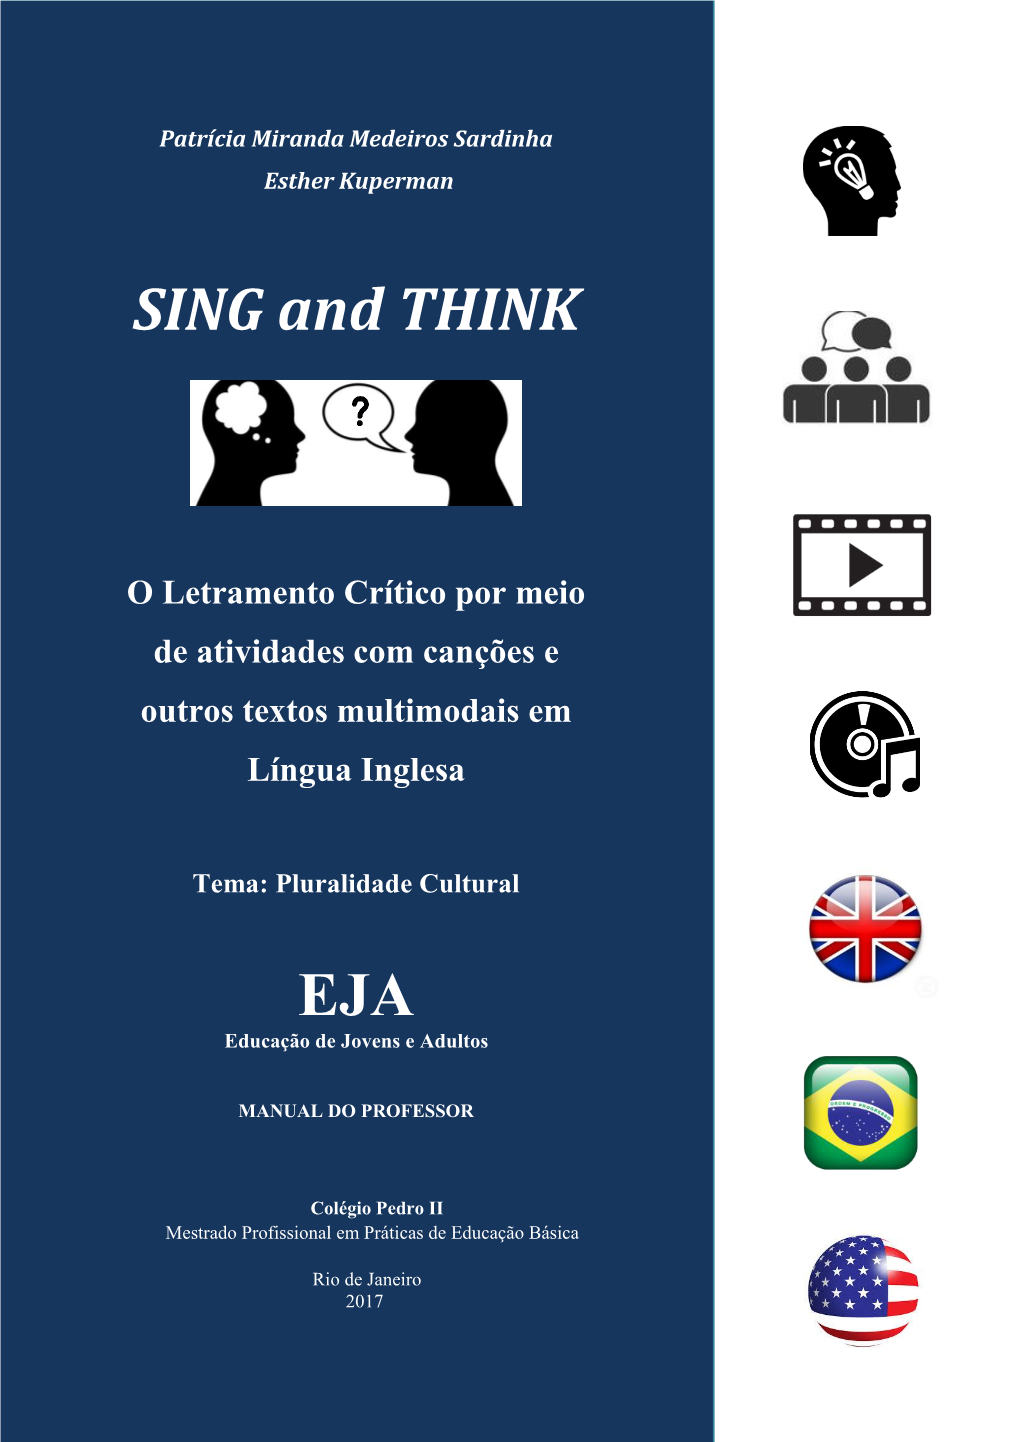 SING and THINK